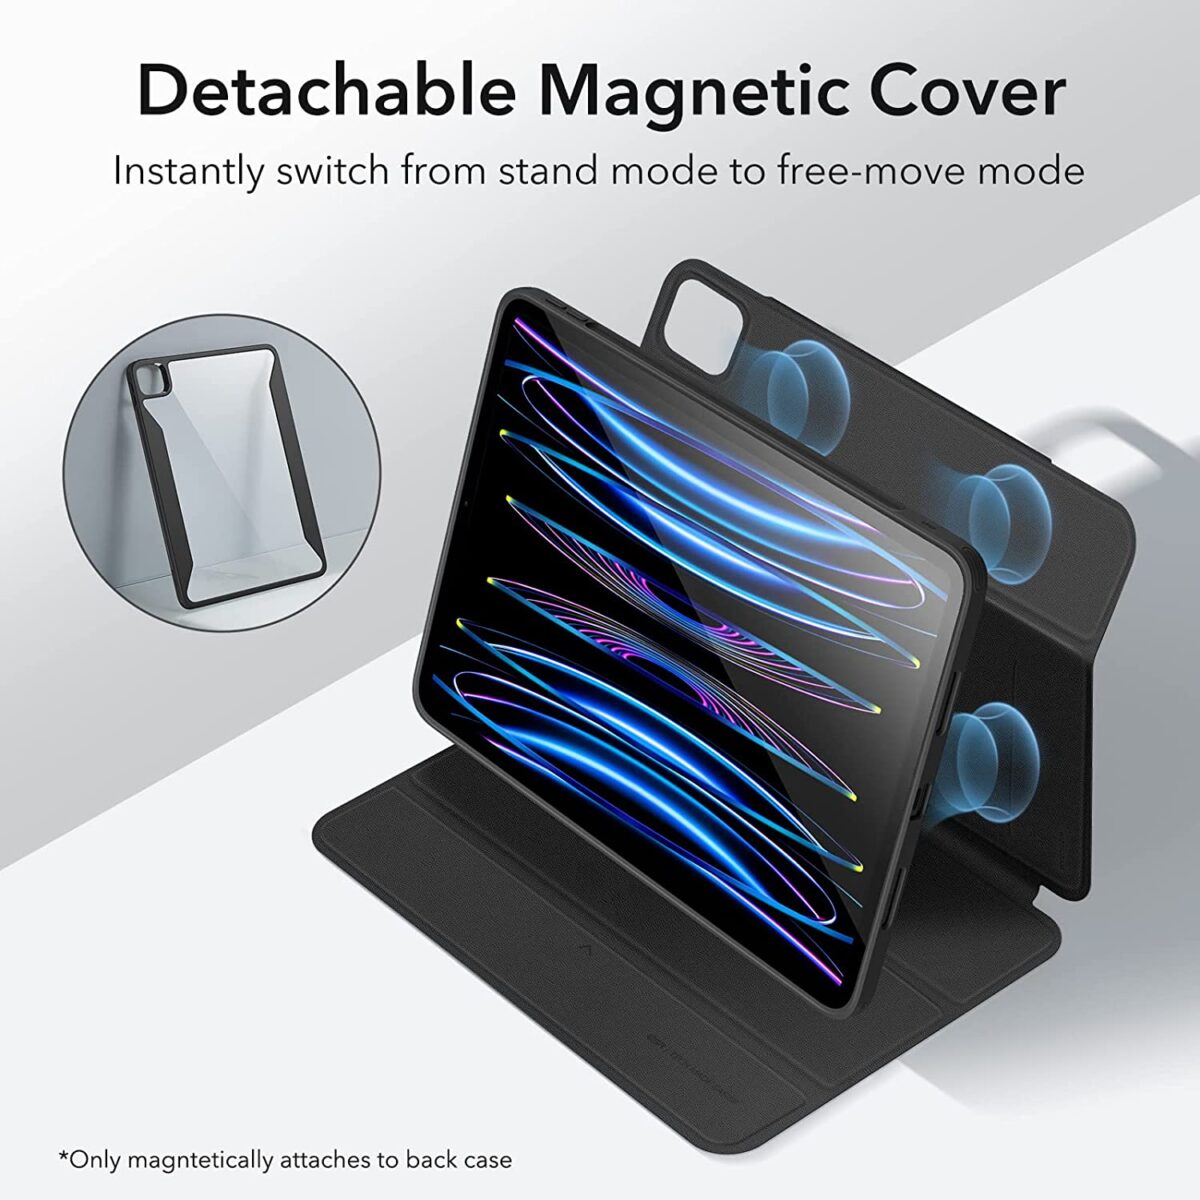 Detachable Magnetic Cover for iPad Pro